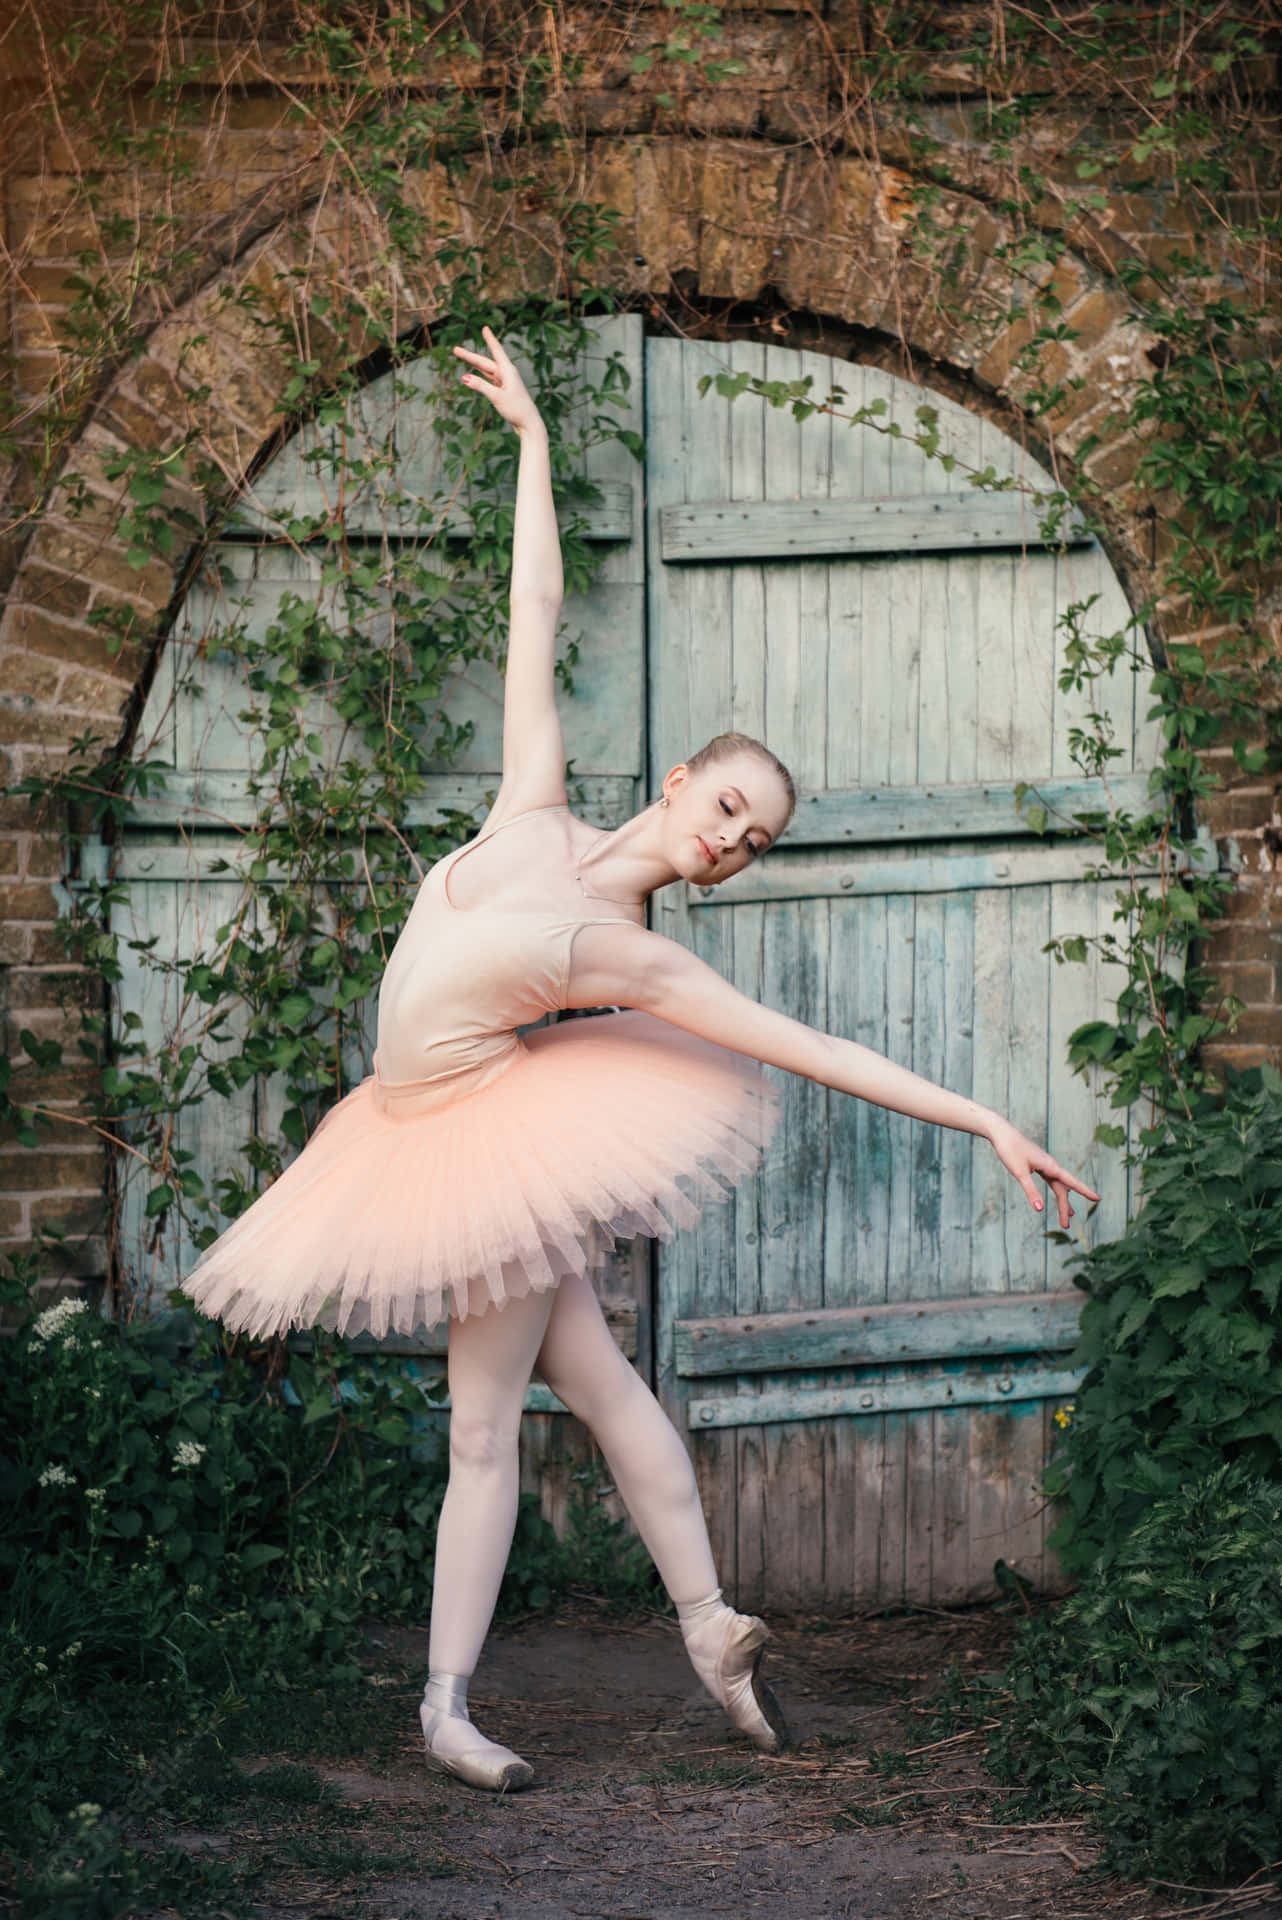 A graceful ballet dancer posing in a classical romantic costume.